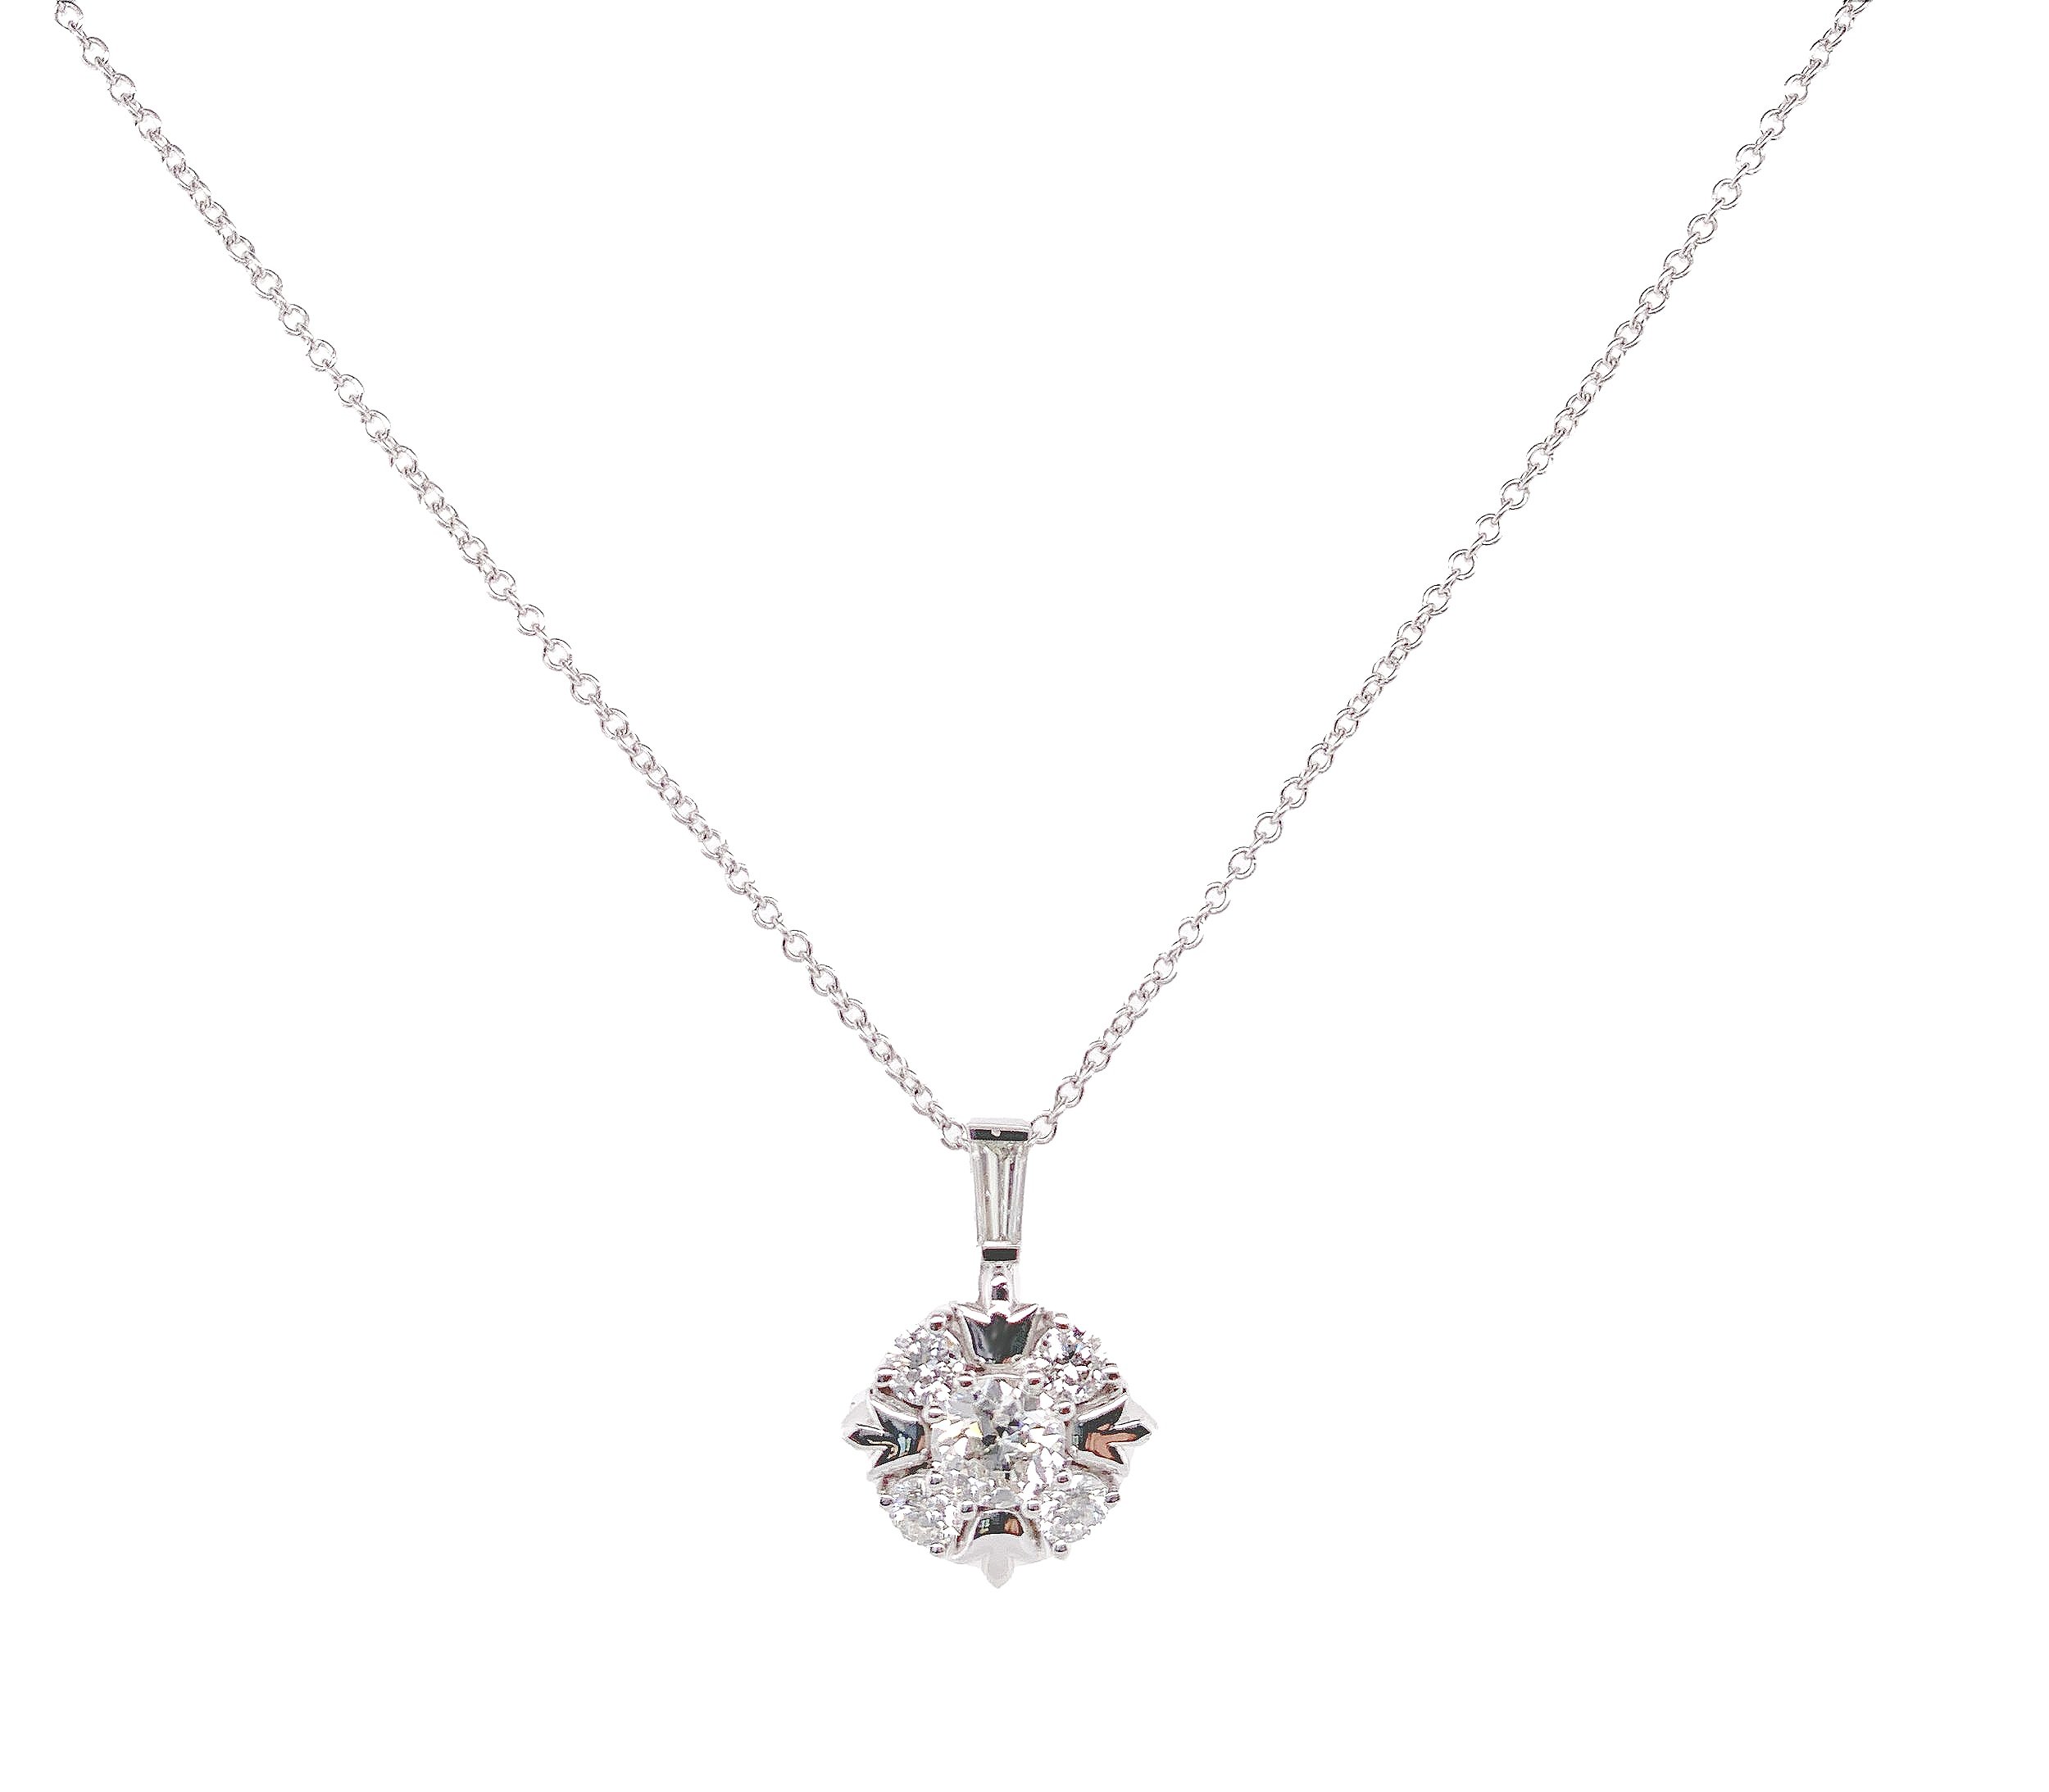 10K Yellow Gold Plated 1/4 Carat Diamond Pendant Necklace in Sterling  Silver | eBay